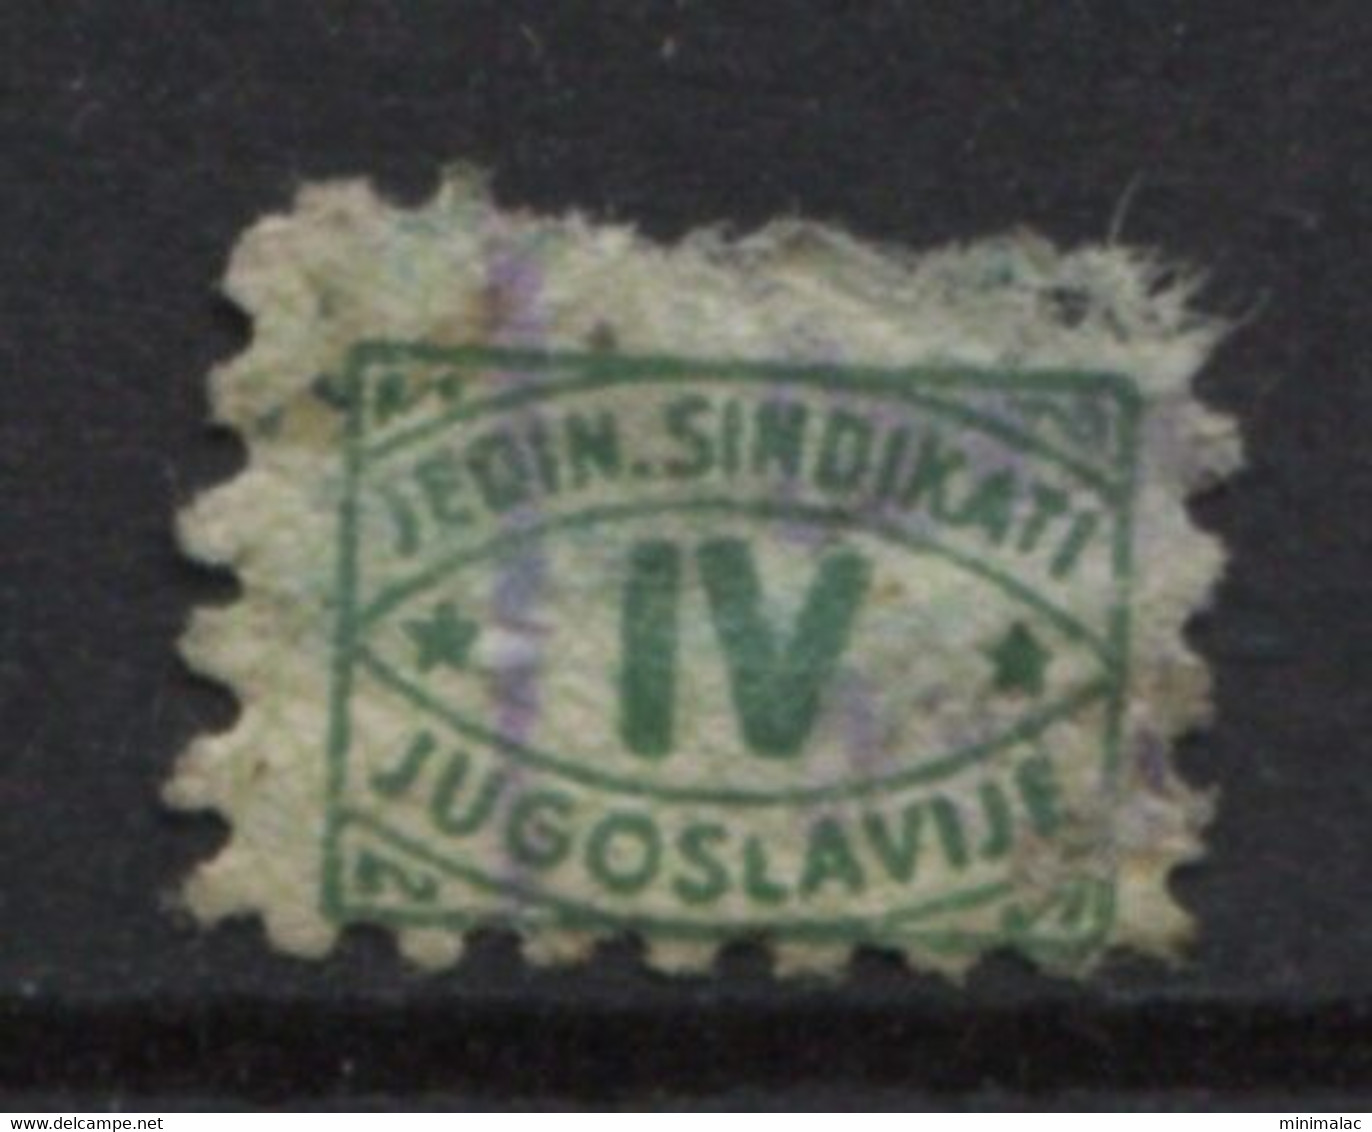 Yugoslavia 45-50's, Stamp For Membership, Labor Union, Administrative Stamp - Revenue, Tax Stamp, IV, Dark Green - Officials